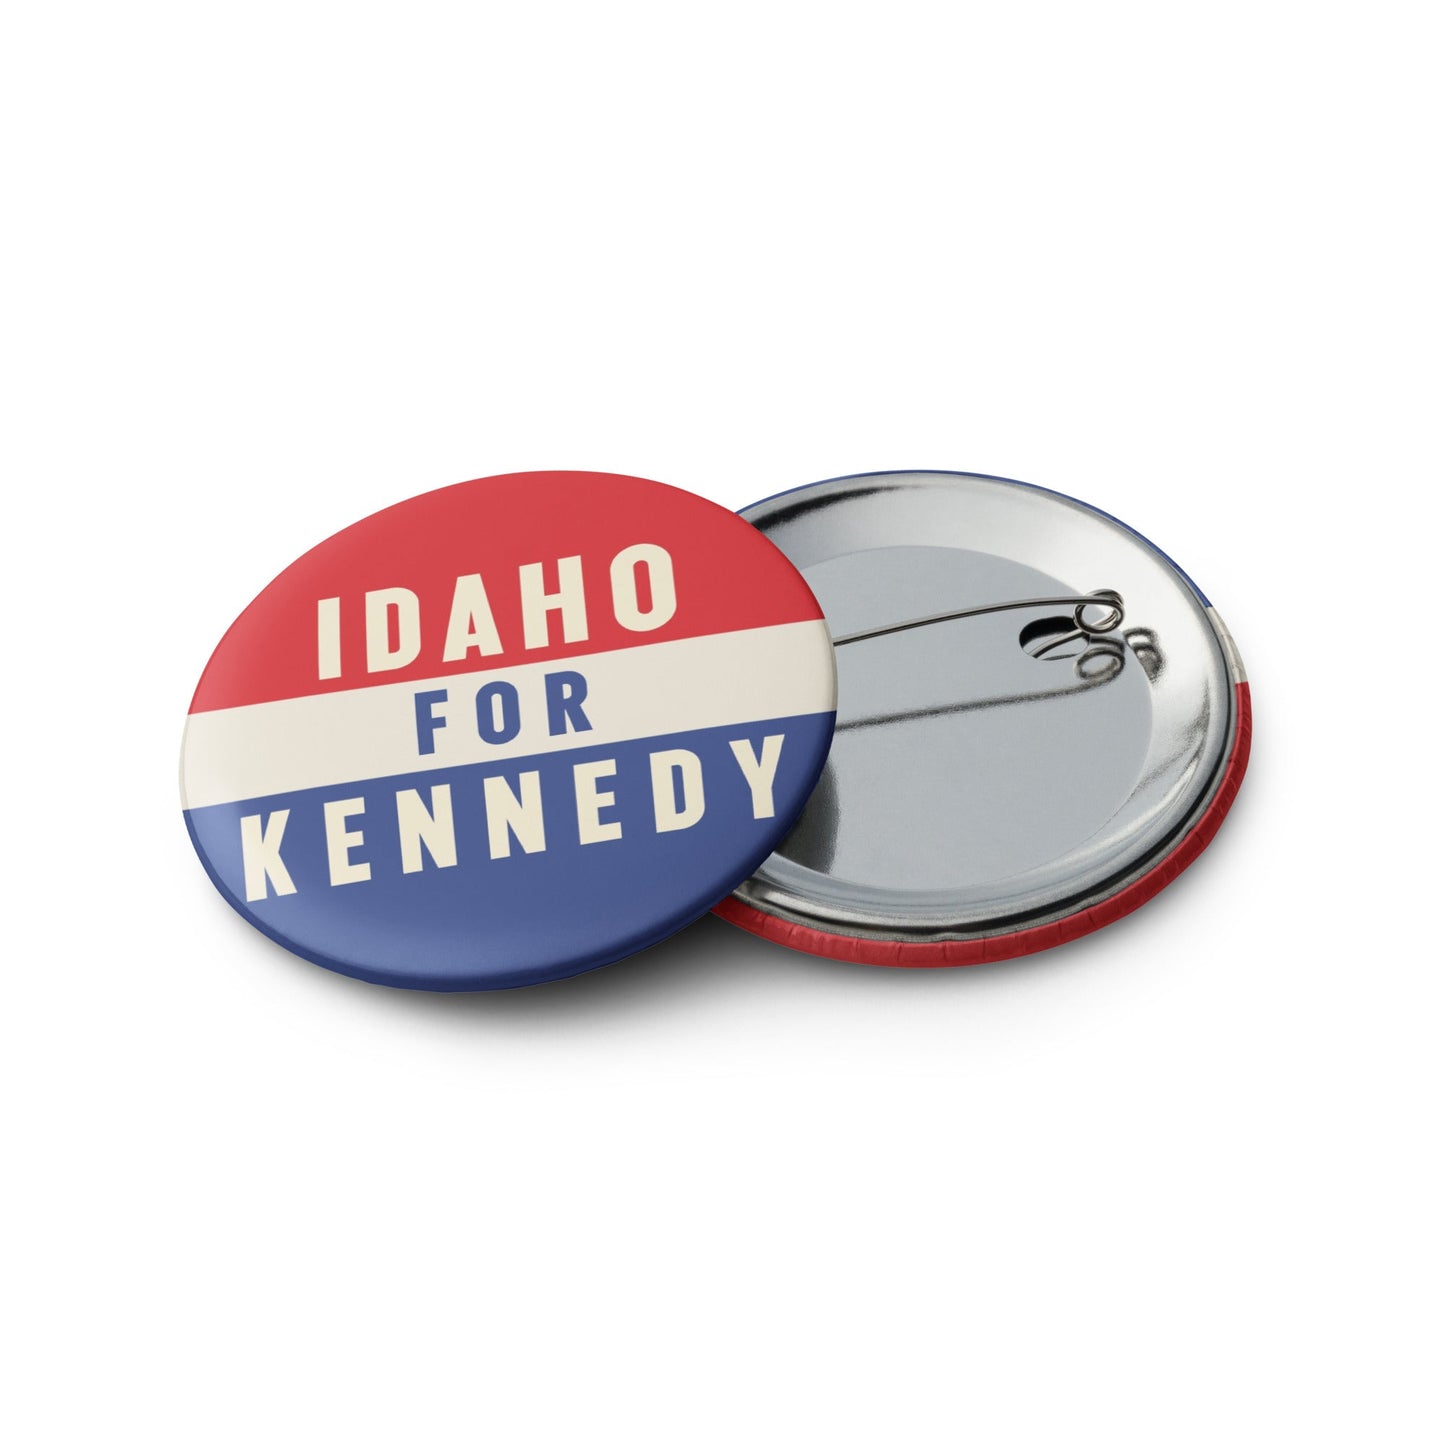 Idaho for Kennedy (5 Buttons) - TEAM KENNEDY. All rights reserved